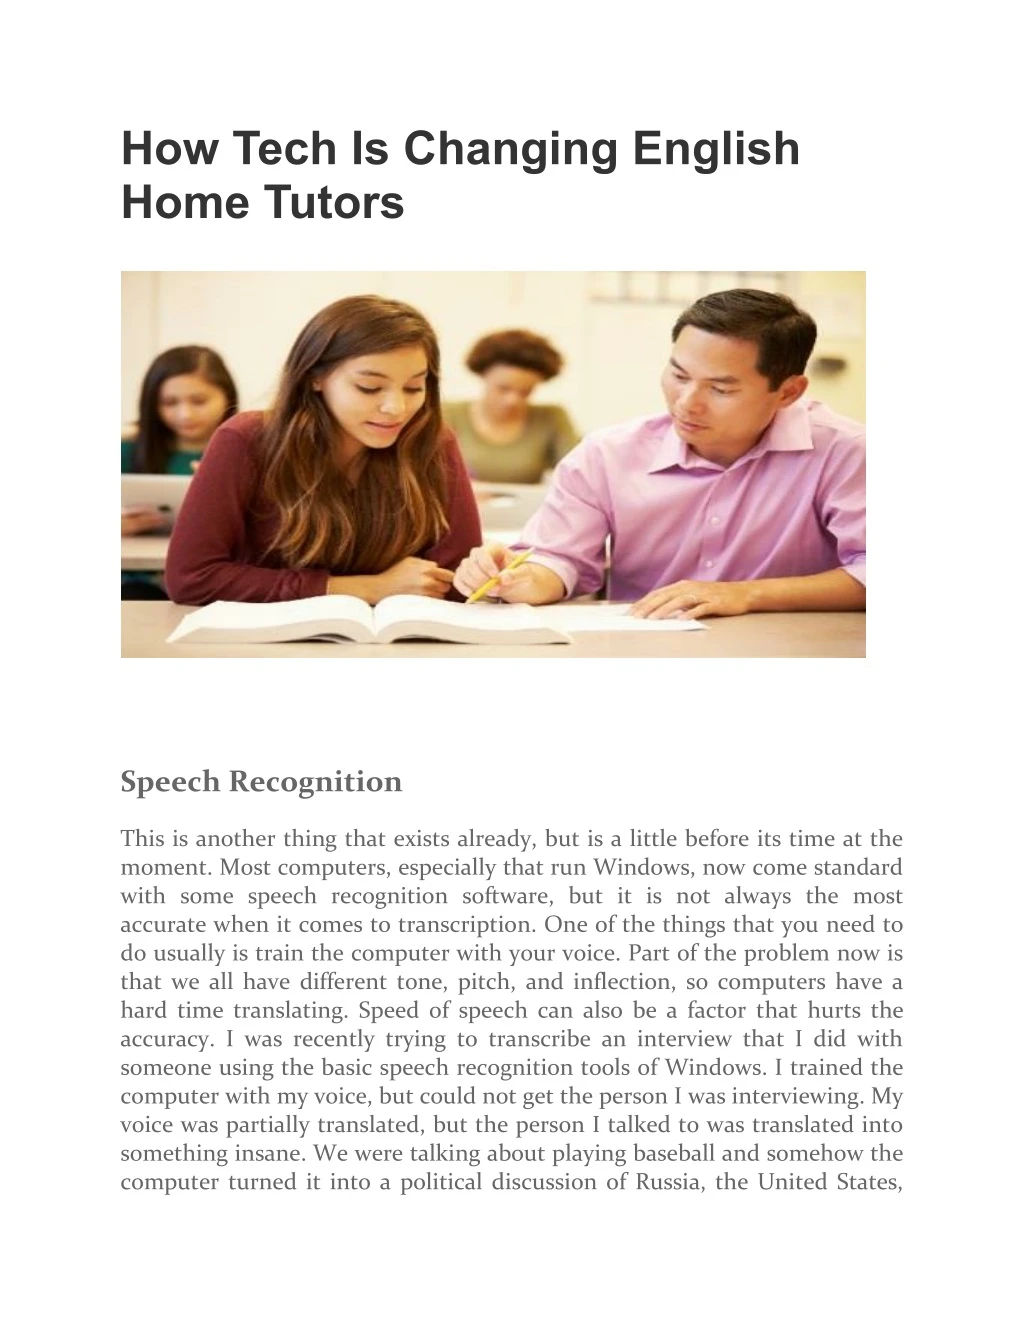 how tech is changing english home tutors